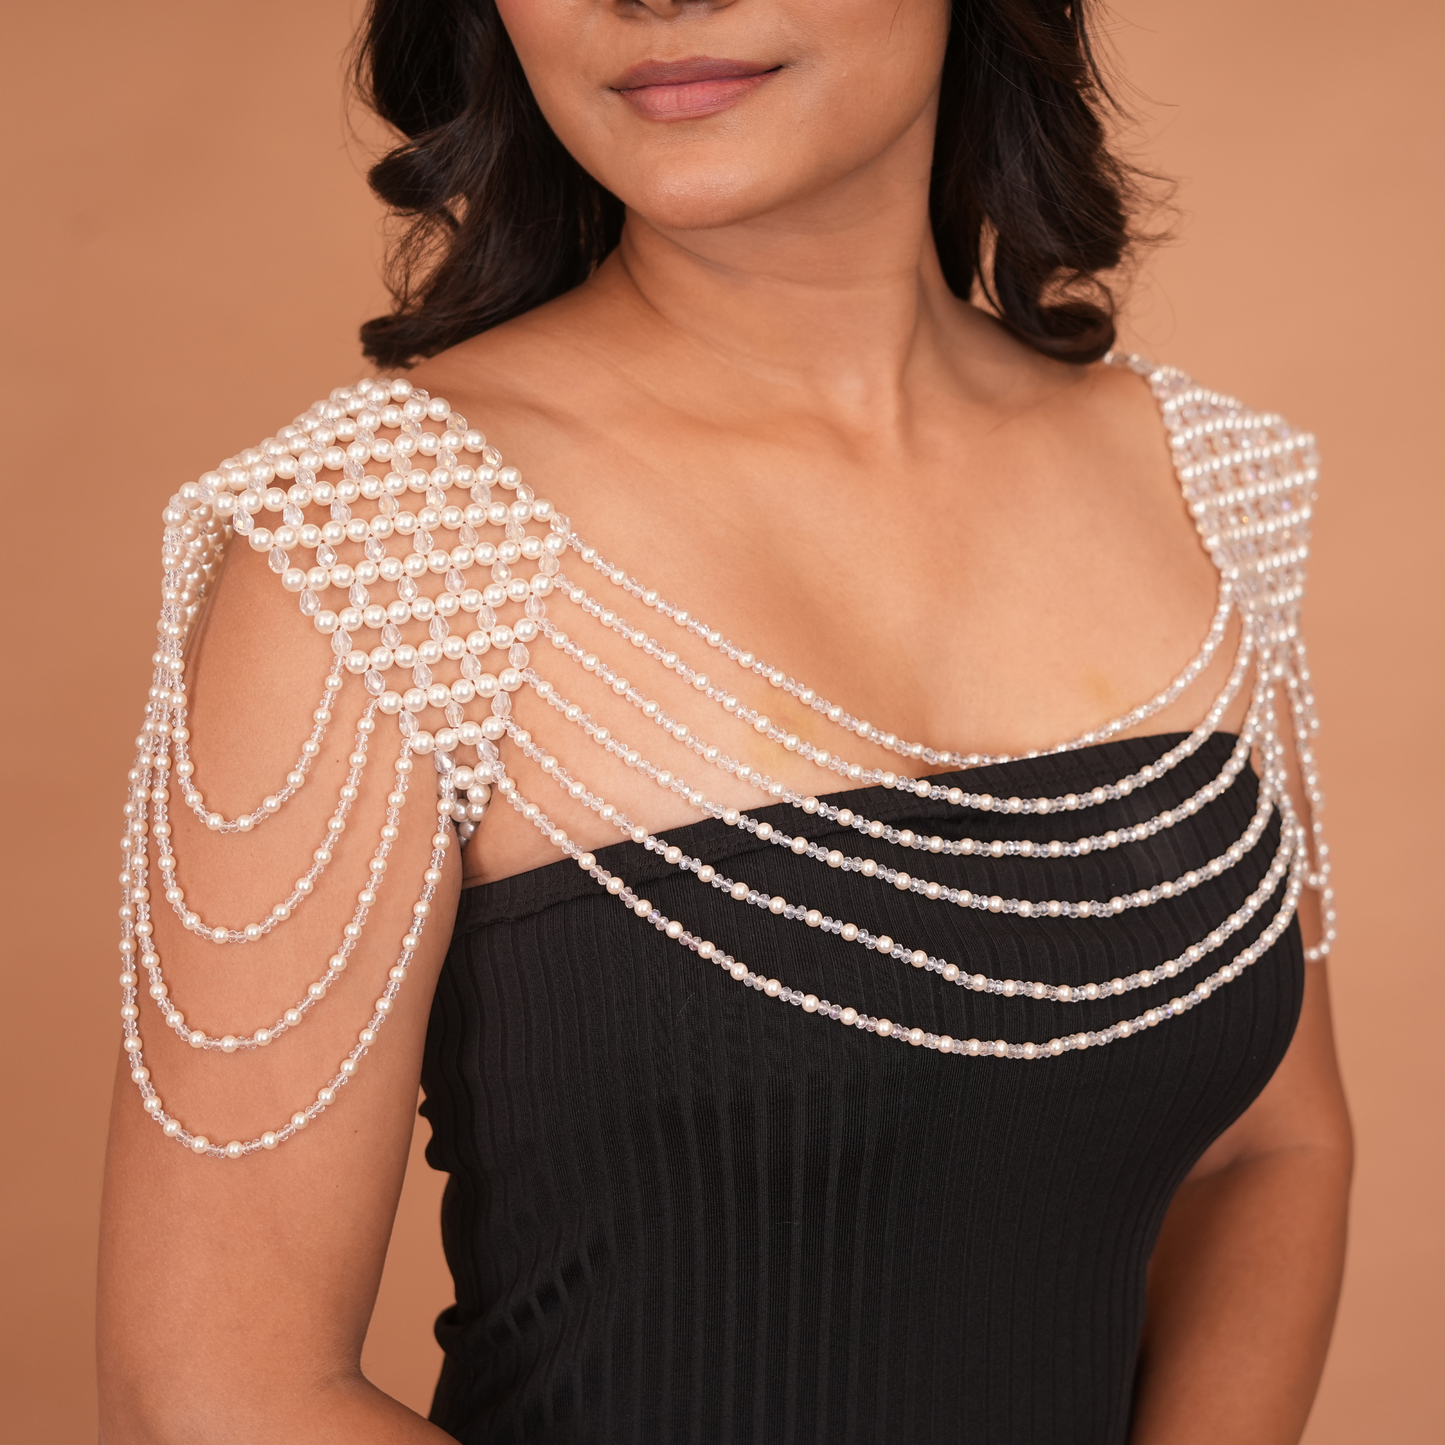 Elegant Simulated Pearl Shoulder and Chest Chain Necklace for Nightclubs and Brides